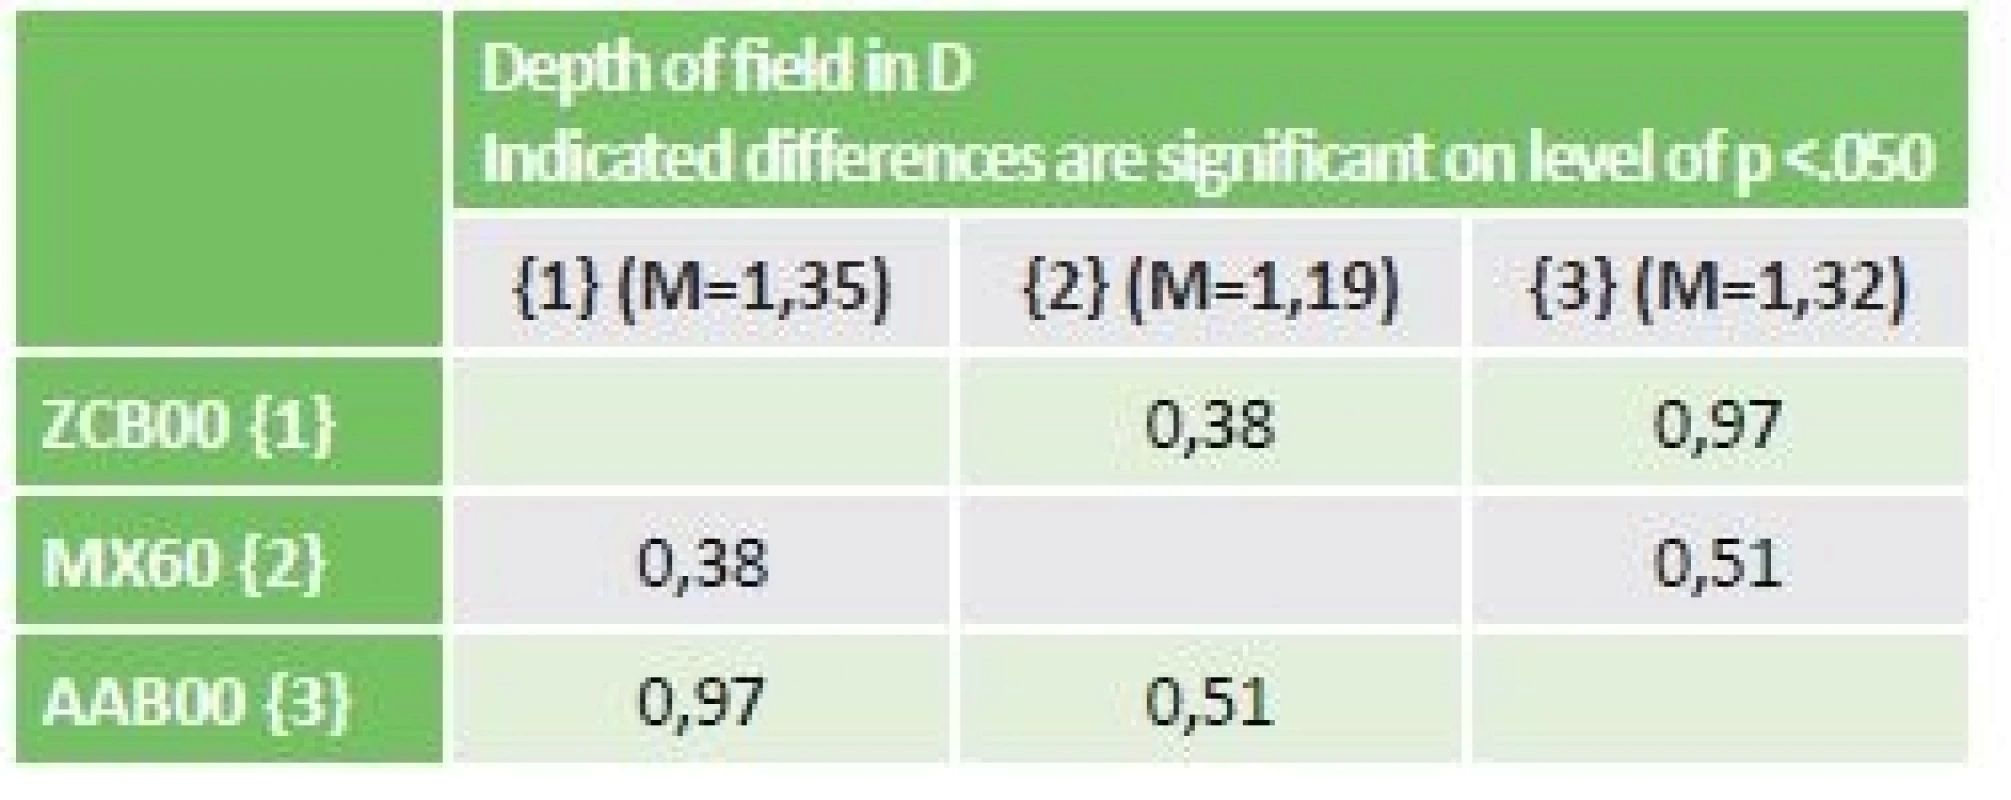 Statistics of difference of DoF for 3 types of IOL.